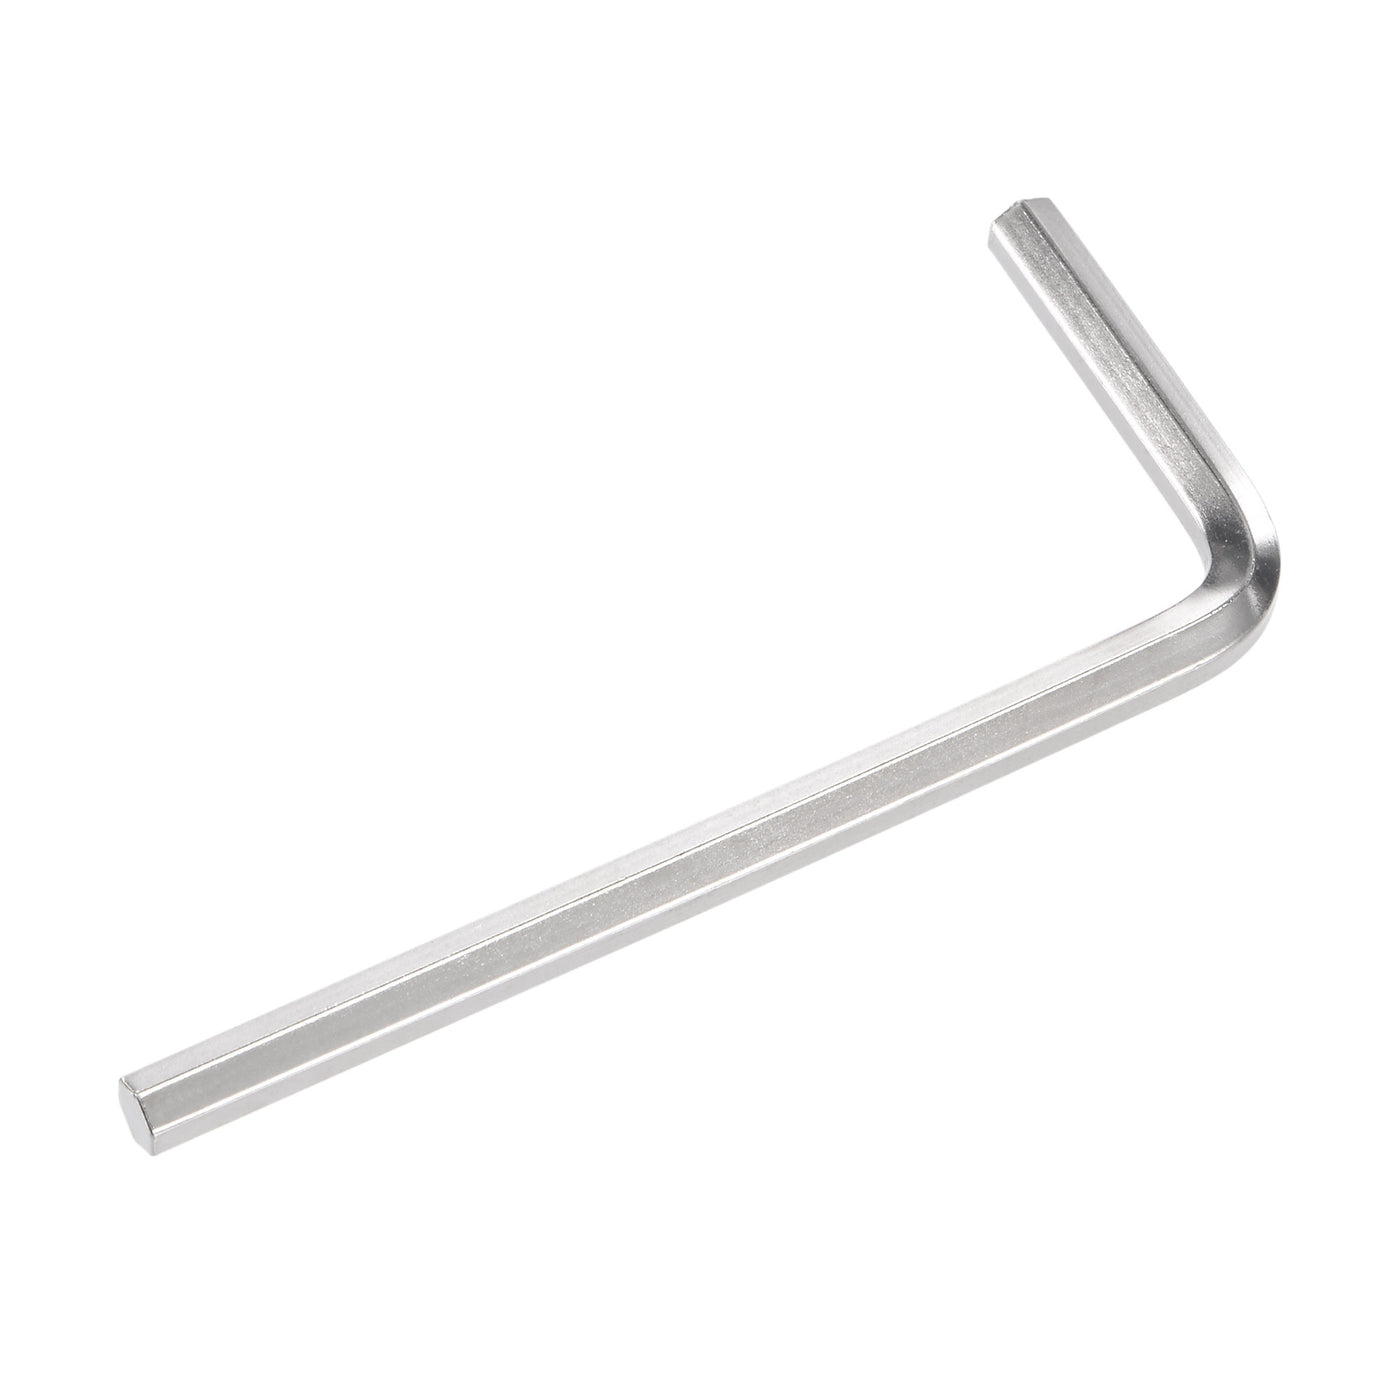 uxcell Uxcell Hex Key Wrench, L Shaped Long Arm CR-V Repairing Tools